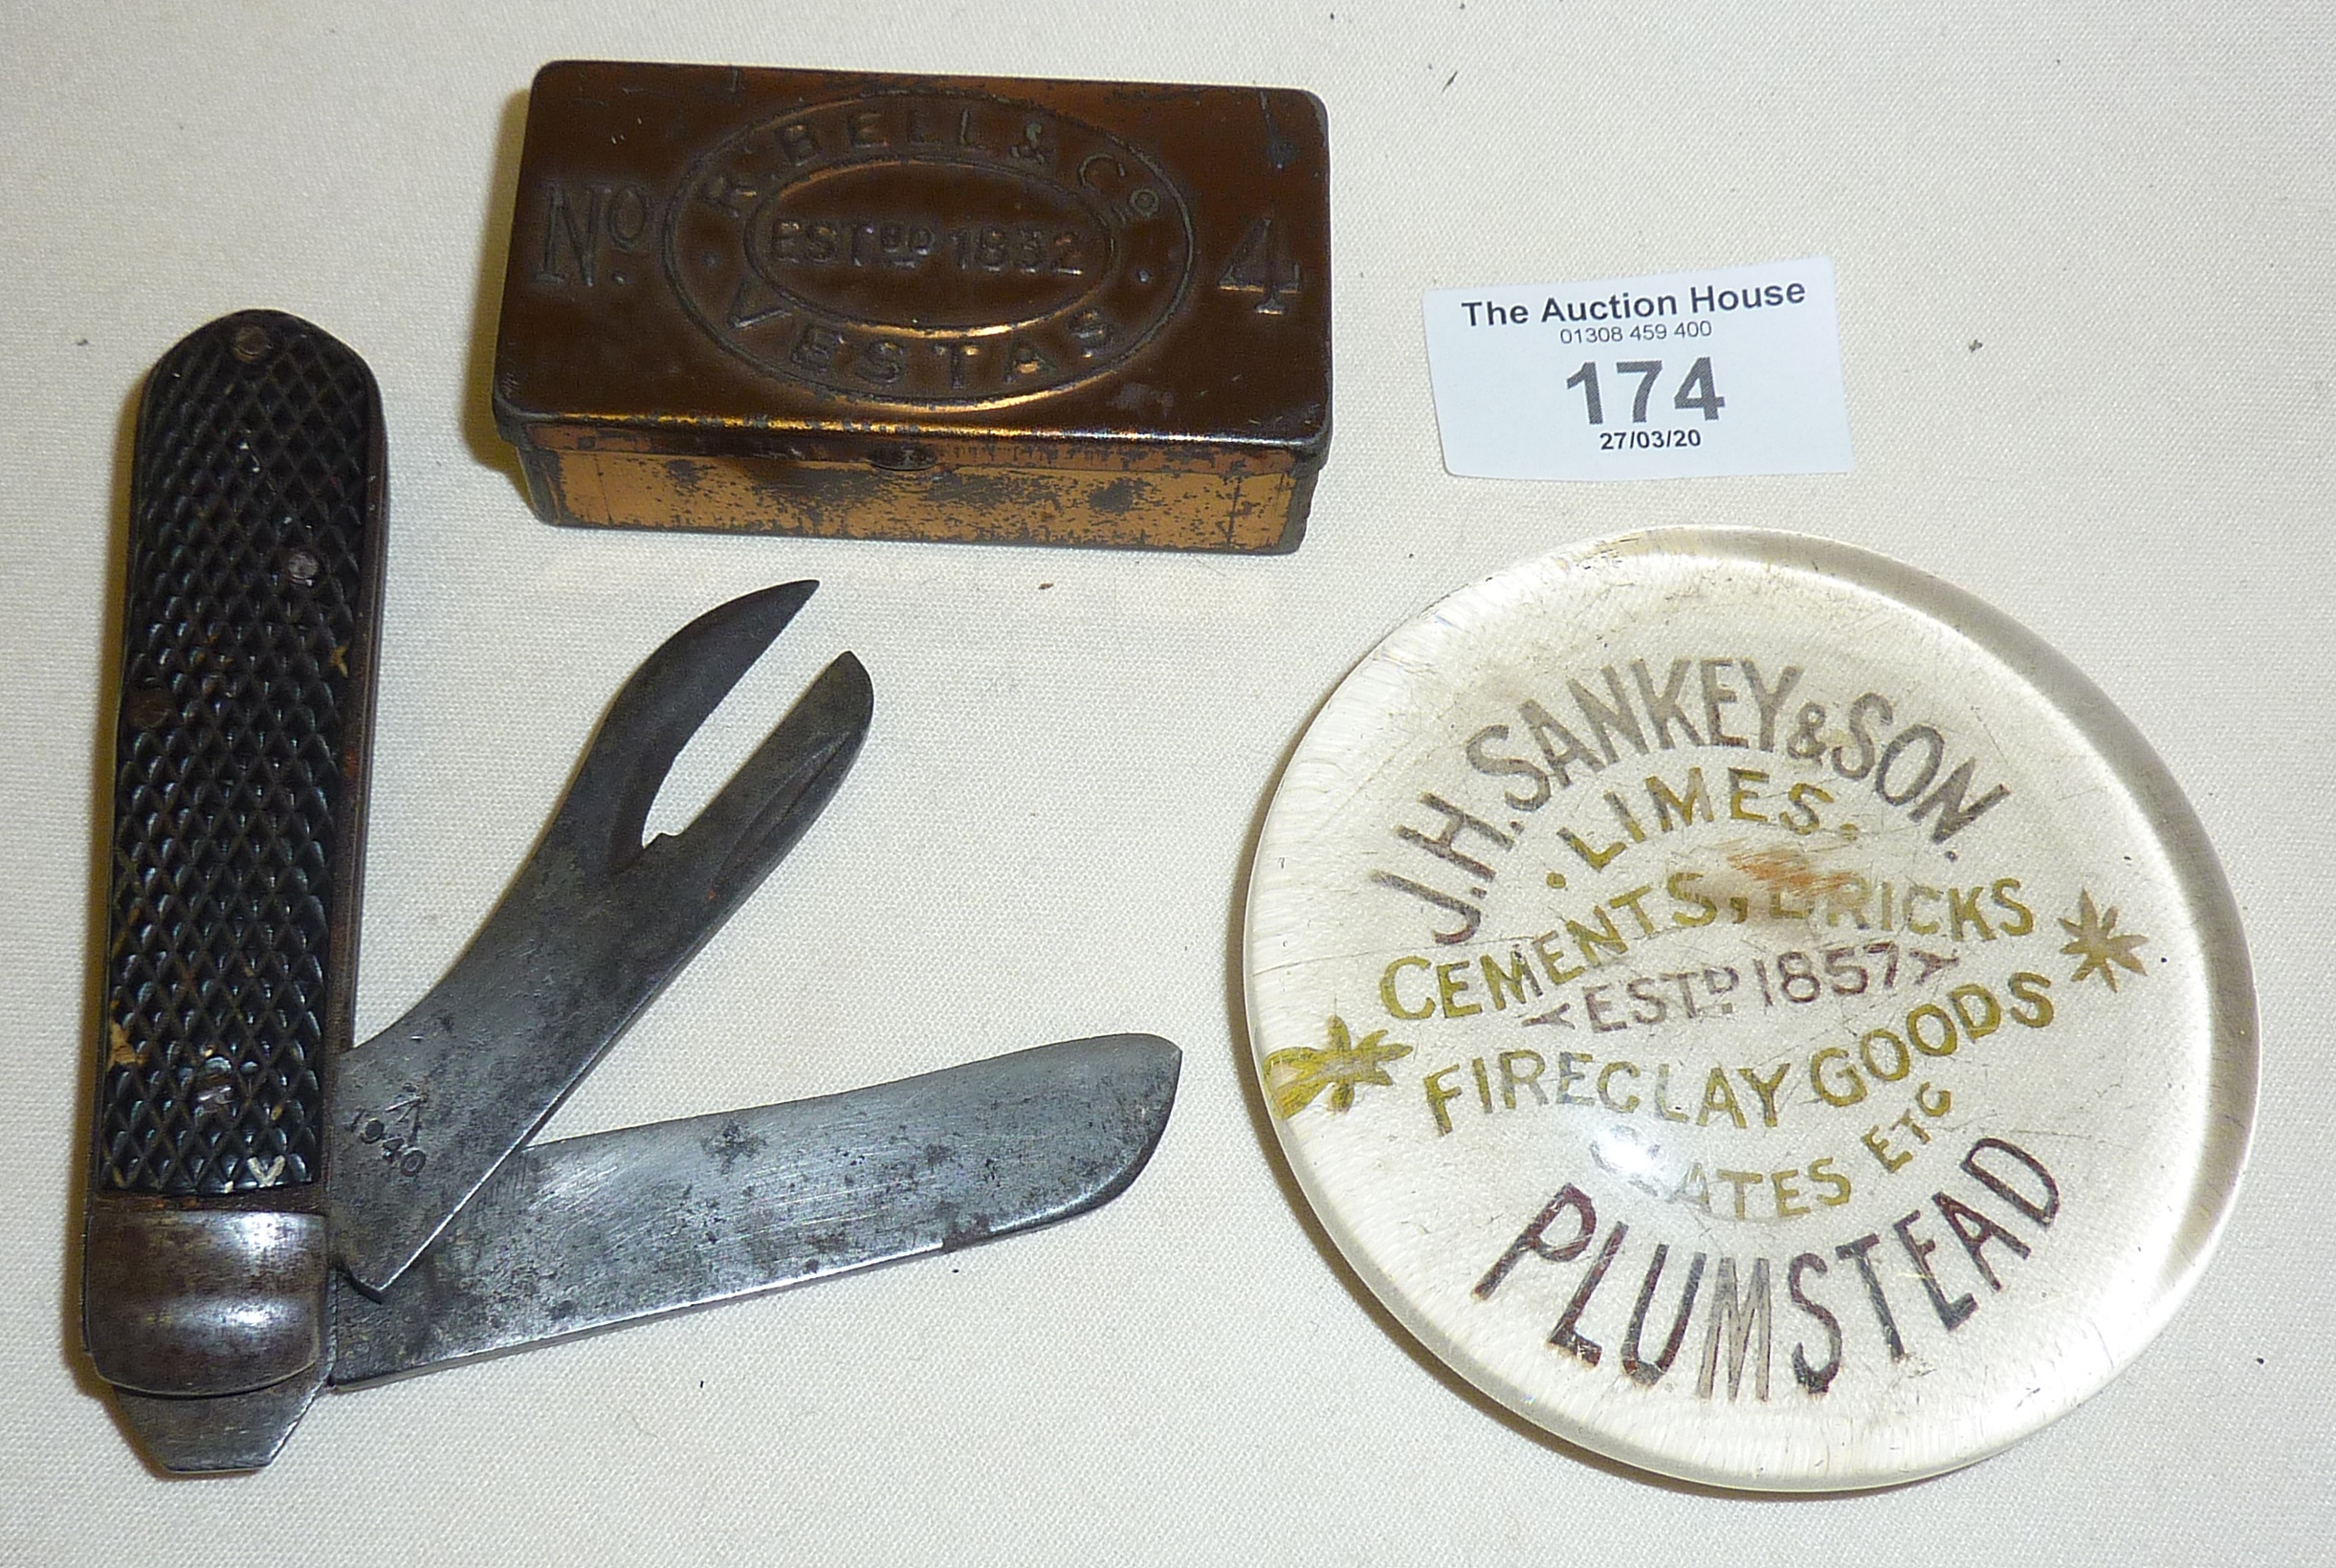 WW2 pocket knife marked with military arrow - "1940", R. Bell & Co. Vestas tin, and a Sankey & Son - Image 2 of 4